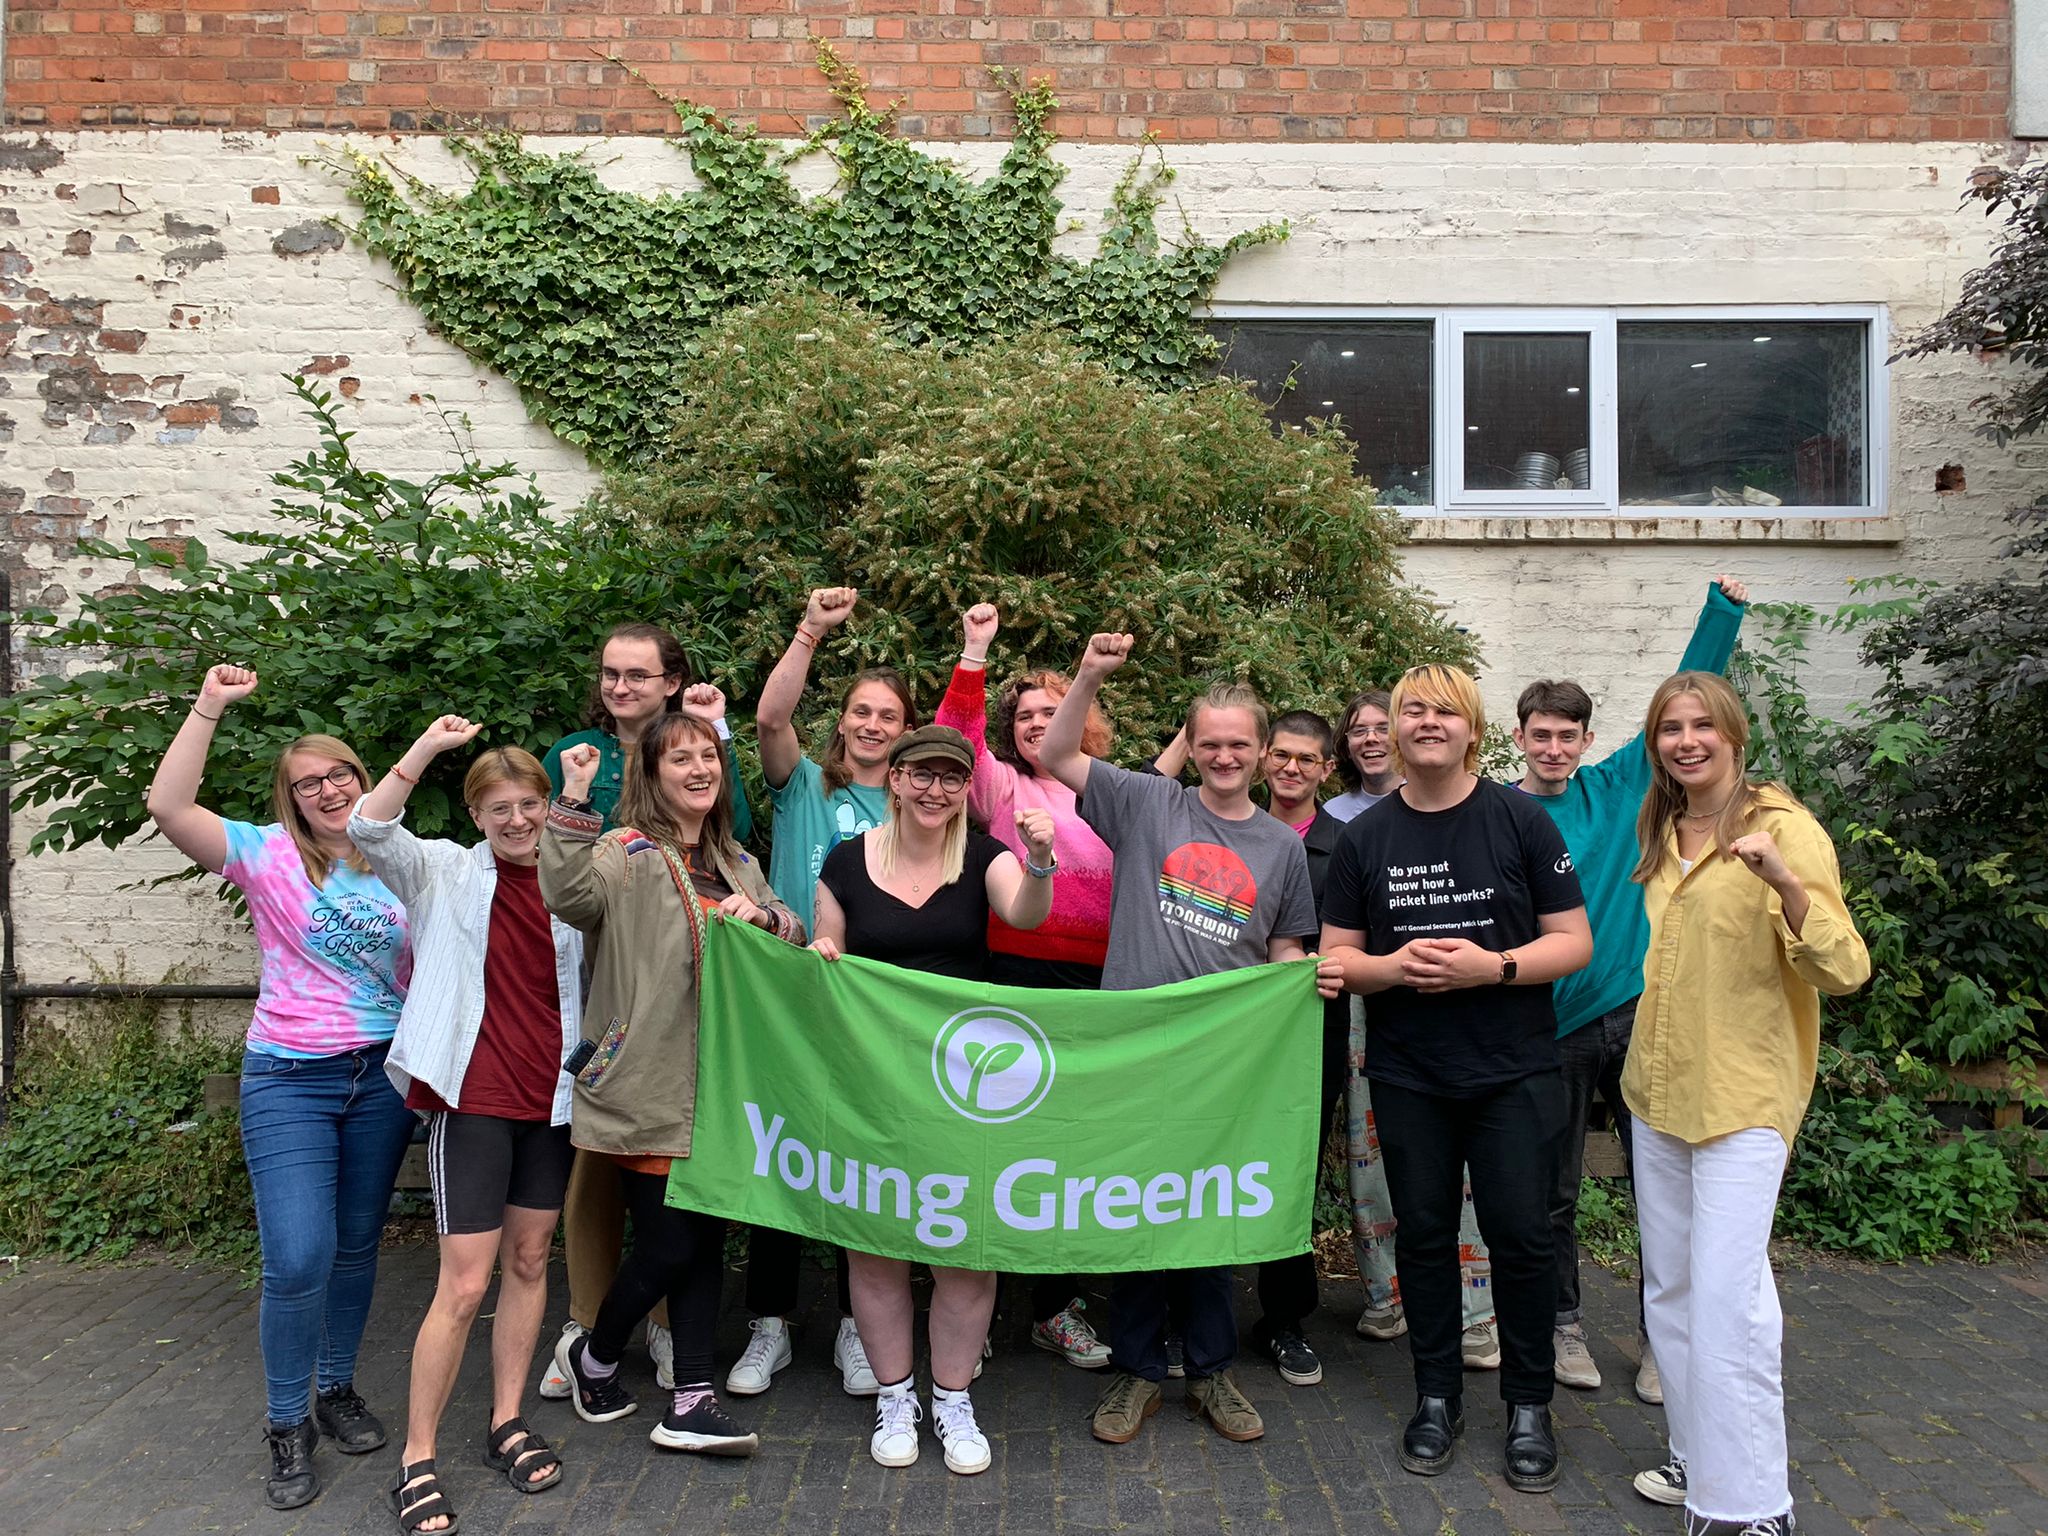 The Young Greens Executive Committee stood with the Young Greens banner and their fists raised.